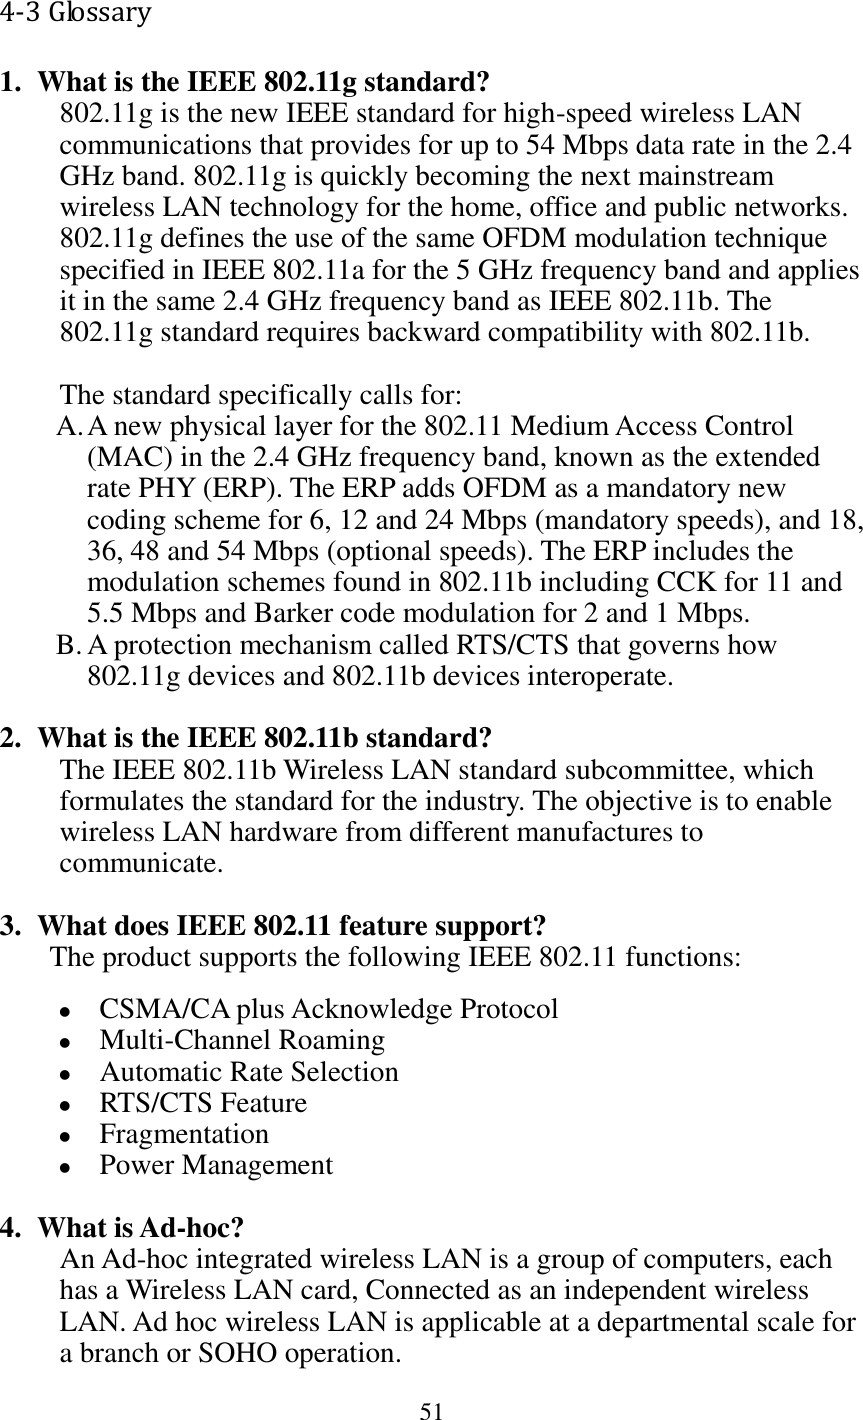 51  4-3 Glossary 1. What is the IEEE 802.11g standard? 802.11g is the new IEEE standard for high-speed wireless LAN communications that provides for up to 54 Mbps data rate in the 2.4 GHz band. 802.11g is quickly becoming the next mainstream wireless LAN technology for the home, office and public networks.   802.11g defines the use of the same OFDM modulation technique specified in IEEE 802.11a for the 5 GHz frequency band and applies it in the same 2.4 GHz frequency band as IEEE 802.11b. The 802.11g standard requires backward compatibility with 802.11b.  The standard specifically calls for:   A. A new physical layer for the 802.11 Medium Access Control (MAC) in the 2.4 GHz frequency band, known as the extended rate PHY (ERP). The ERP adds OFDM as a mandatory new coding scheme for 6, 12 and 24 Mbps (mandatory speeds), and 18, 36, 48 and 54 Mbps (optional speeds). The ERP includes the modulation schemes found in 802.11b including CCK for 11 and 5.5 Mbps and Barker code modulation for 2 and 1 Mbps. B. A protection mechanism called RTS/CTS that governs how 802.11g devices and 802.11b devices interoperate.  2. What is the IEEE 802.11b standard? The IEEE 802.11b Wireless LAN standard subcommittee, which formulates the standard for the industry. The objective is to enable wireless LAN hardware from different manufactures to communicate.  3. What does IEEE 802.11 feature support? The product supports the following IEEE 802.11 functions:  CSMA/CA plus Acknowledge Protocol  Multi-Channel Roaming  Automatic Rate Selection  RTS/CTS Feature  Fragmentation  Power Management  4. What is Ad-hoc? An Ad-hoc integrated wireless LAN is a group of computers, each has a Wireless LAN card, Connected as an independent wireless LAN. Ad hoc wireless LAN is applicable at a departmental scale for a branch or SOHO operation. 